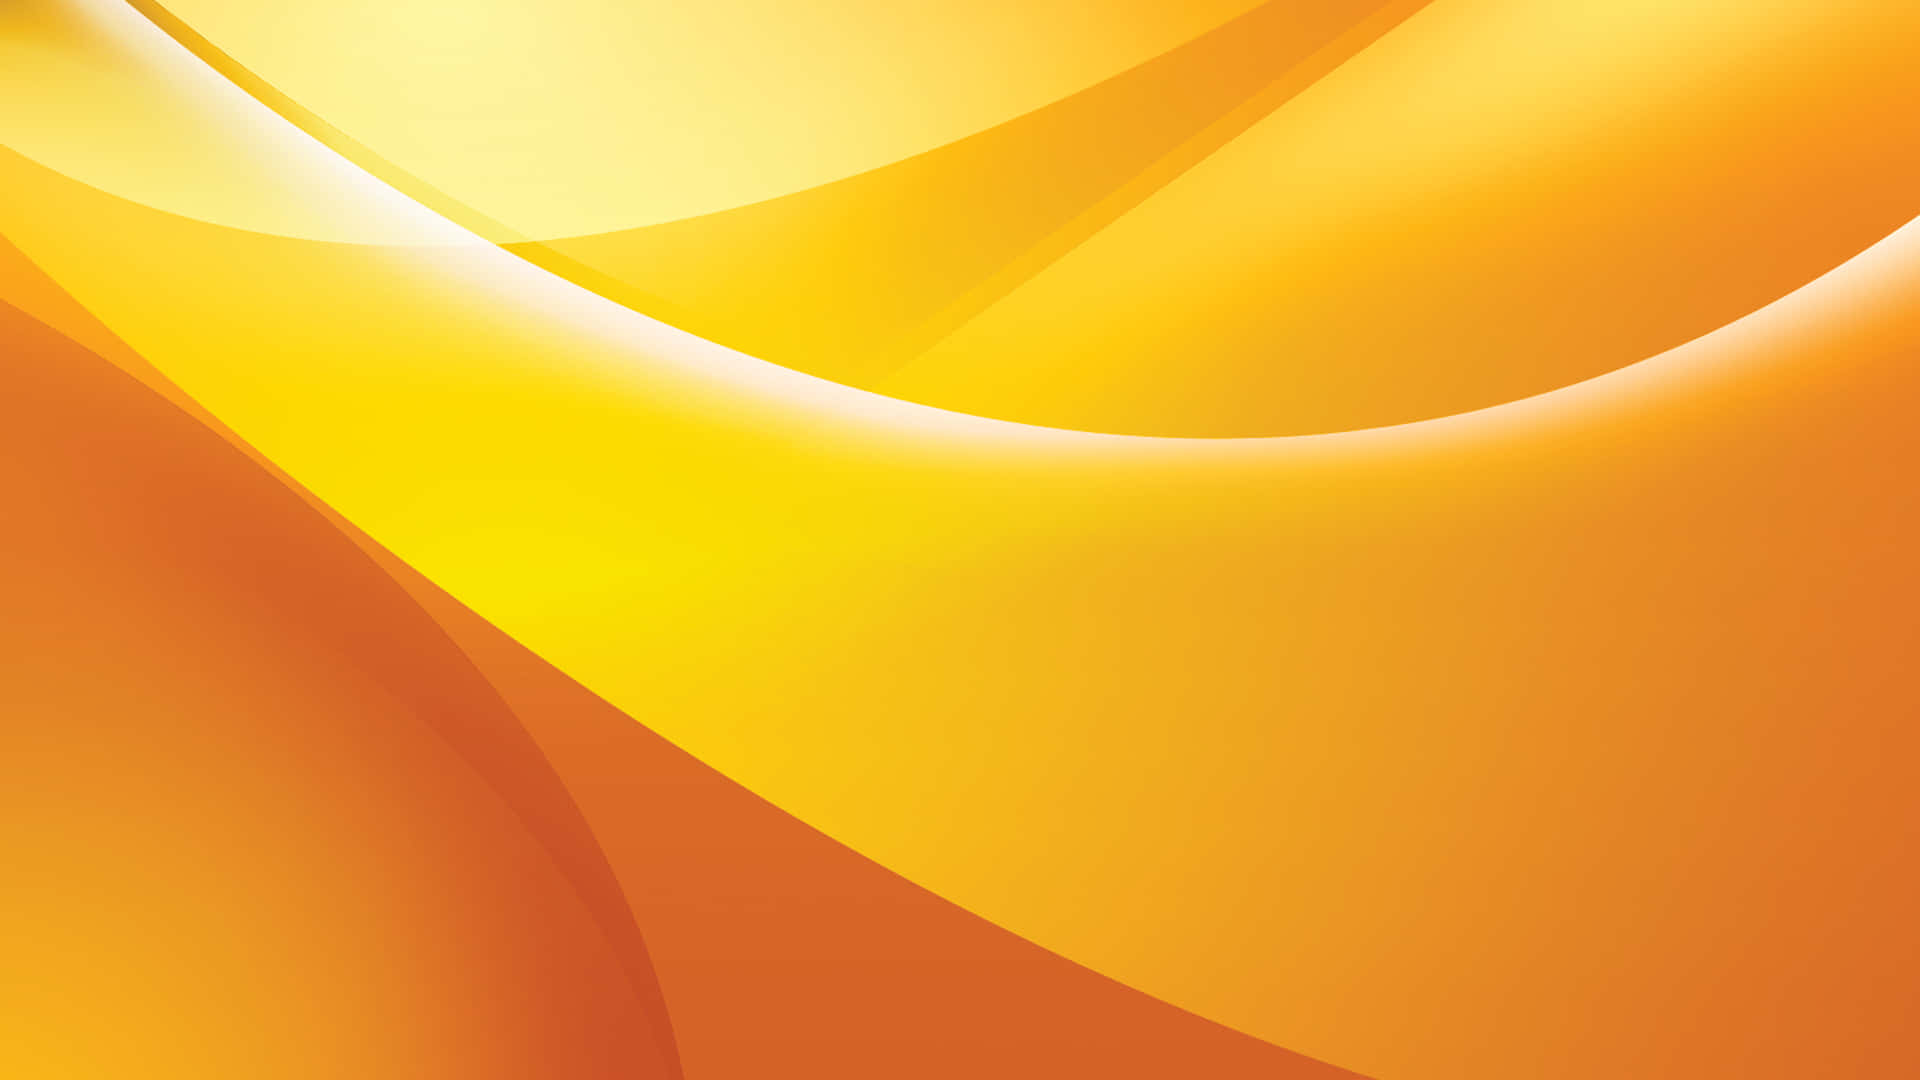 An Orange Background With A Wavy Shape Wallpaper